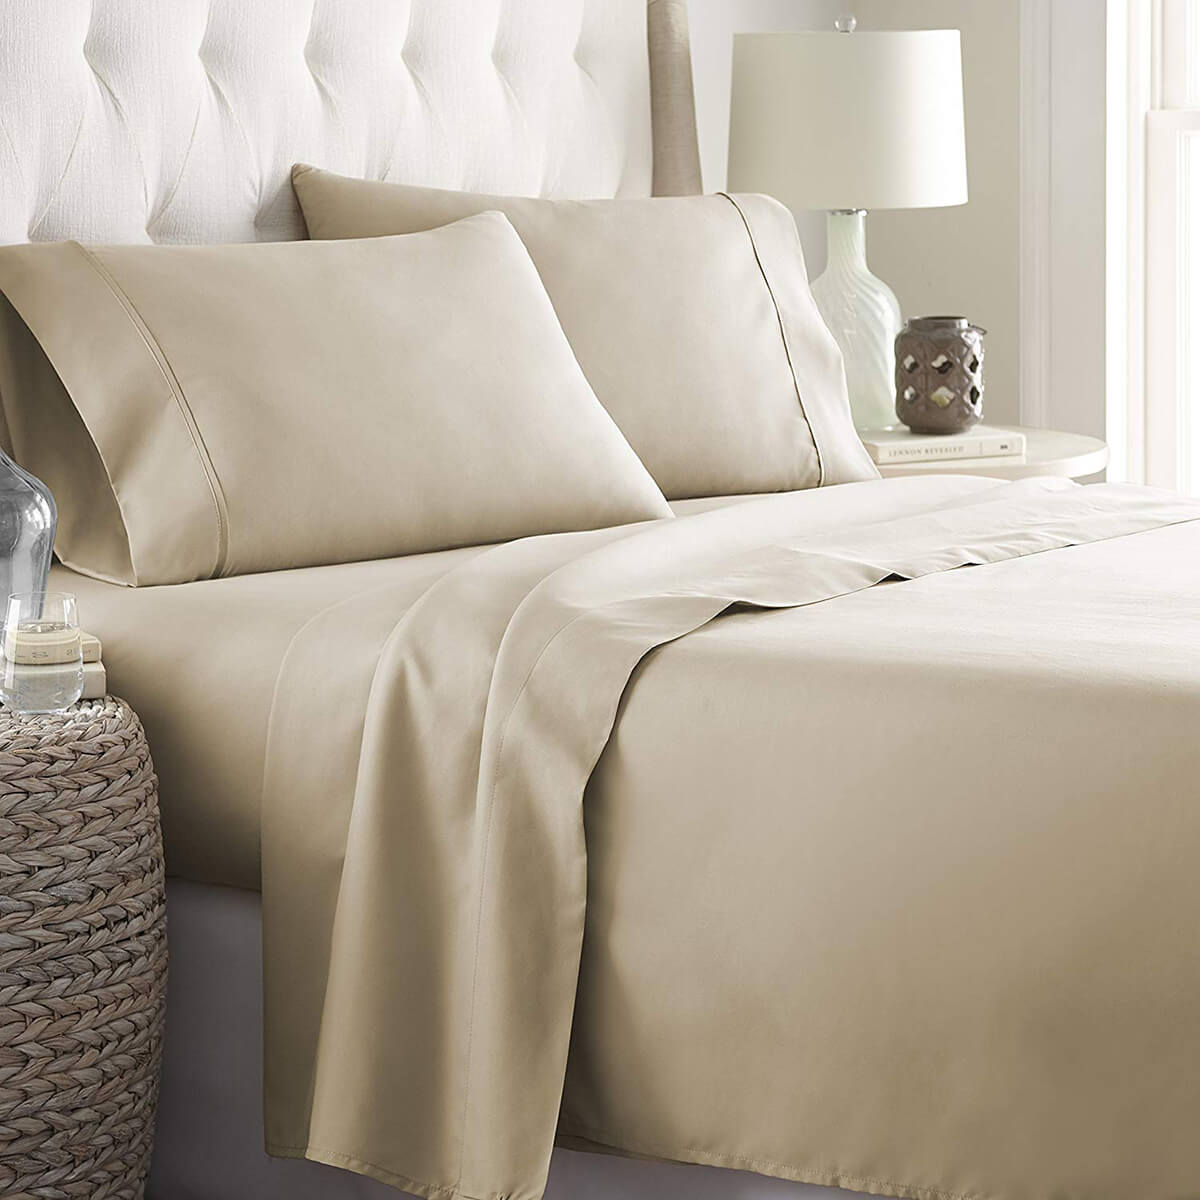 6 Gorgeous Bed Sheet Ideas for your Bedroom - Peacoy